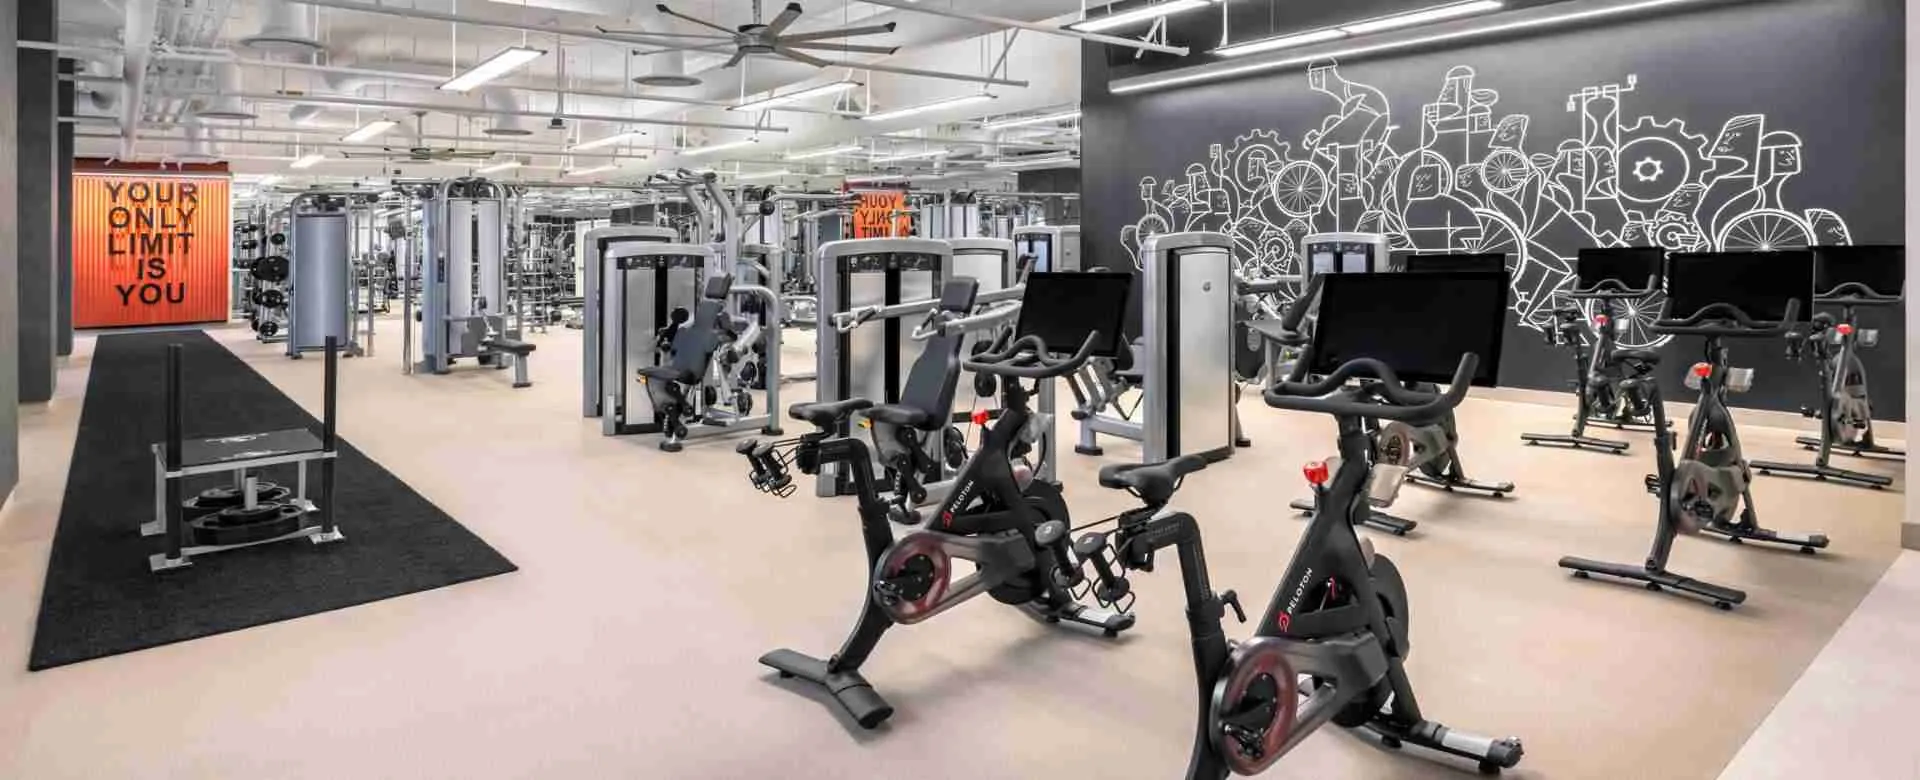 What's the best hotel gym in Las Vegas